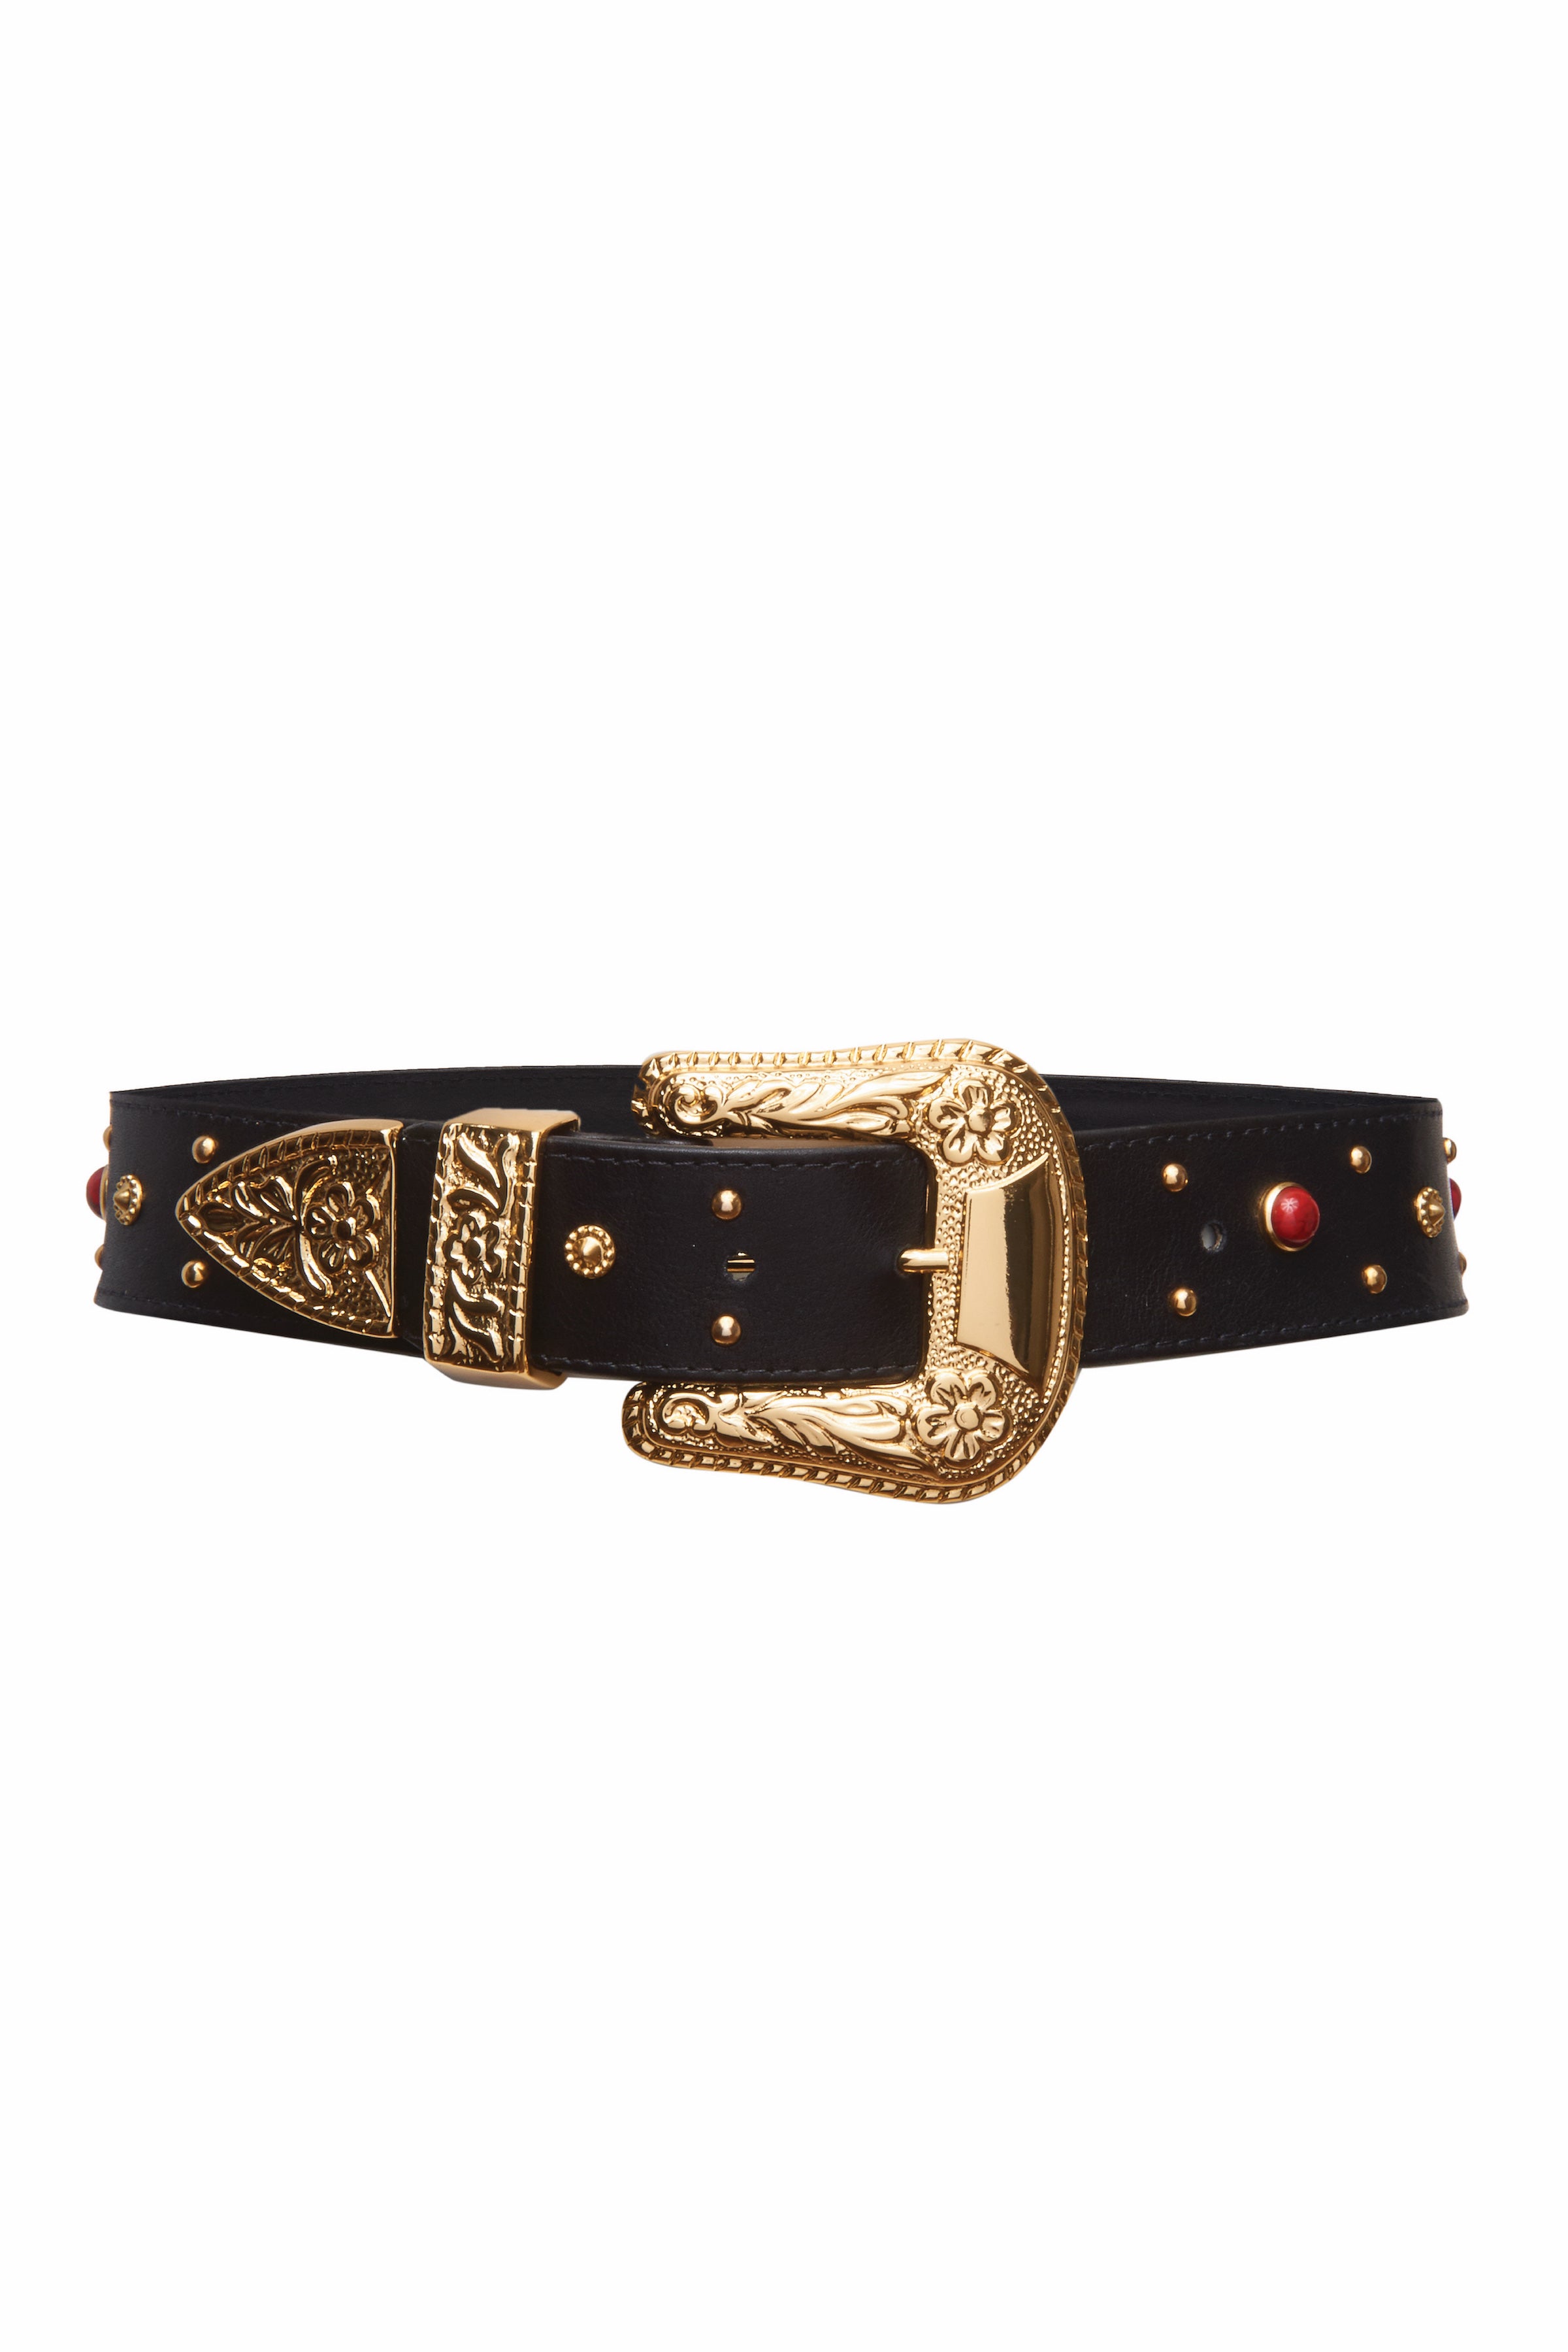 Serendipity Black Leather Belt with Engraved Gold Buckle and Stones